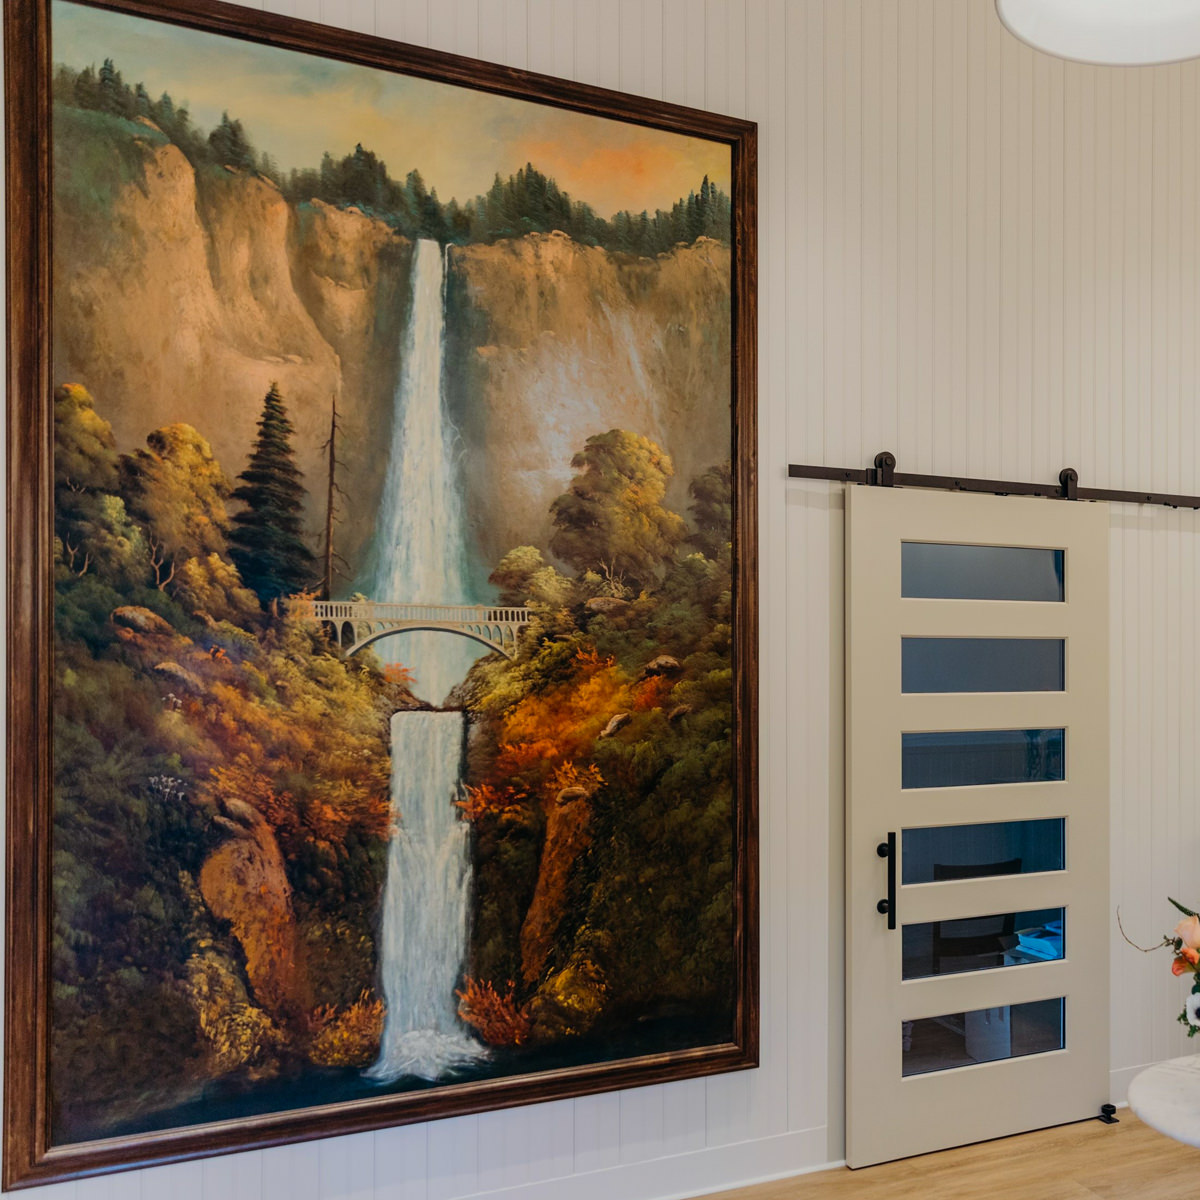 Click the Century-Old Multnomah Falls Painting Slide Photo to Open